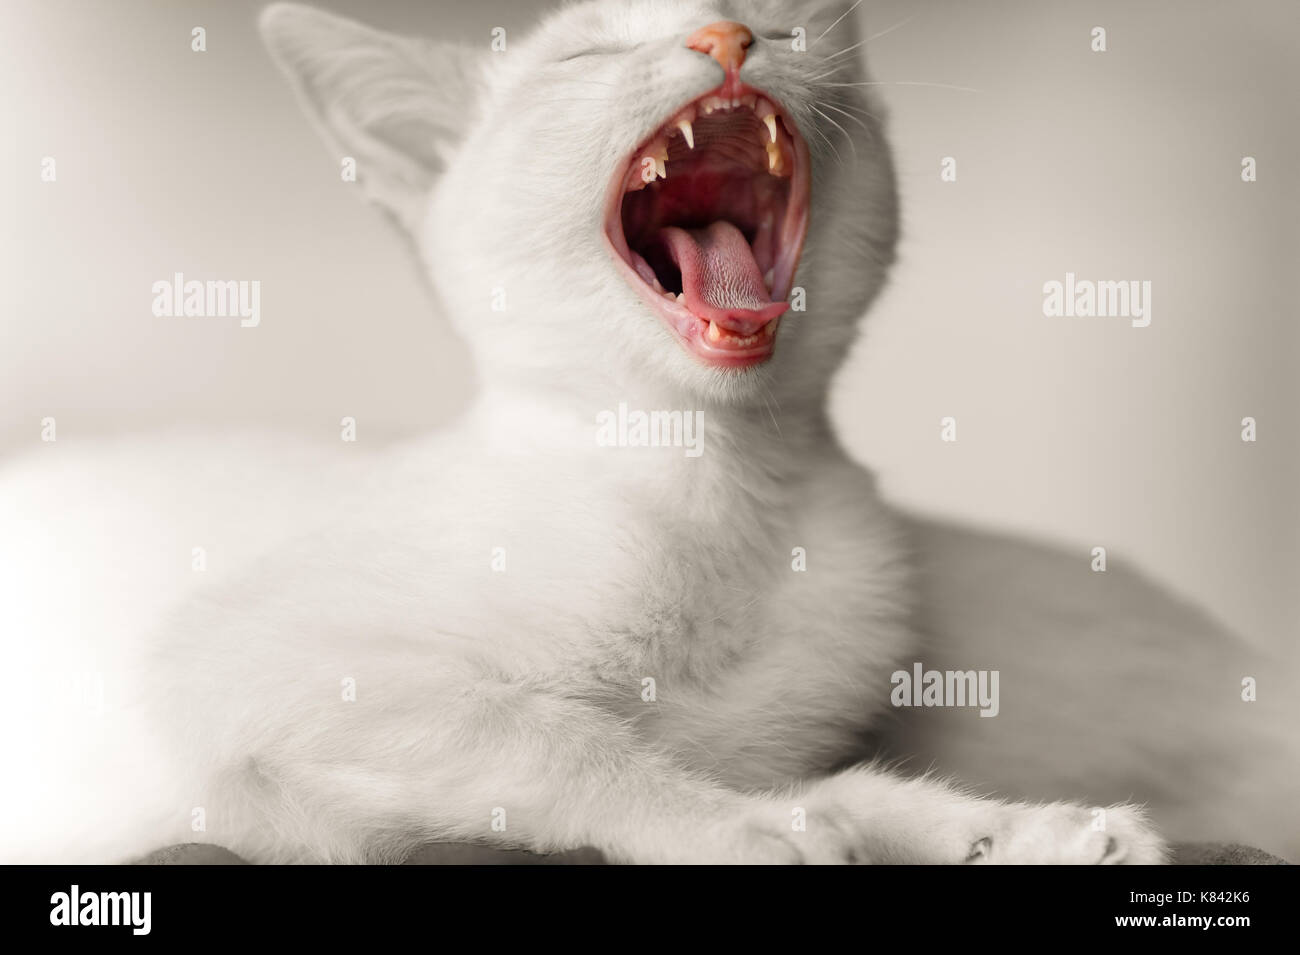 Kitten cat angry is a cute adorable white kitty cat looking fierce with it teeth and mouth wide open.. Stock Photo